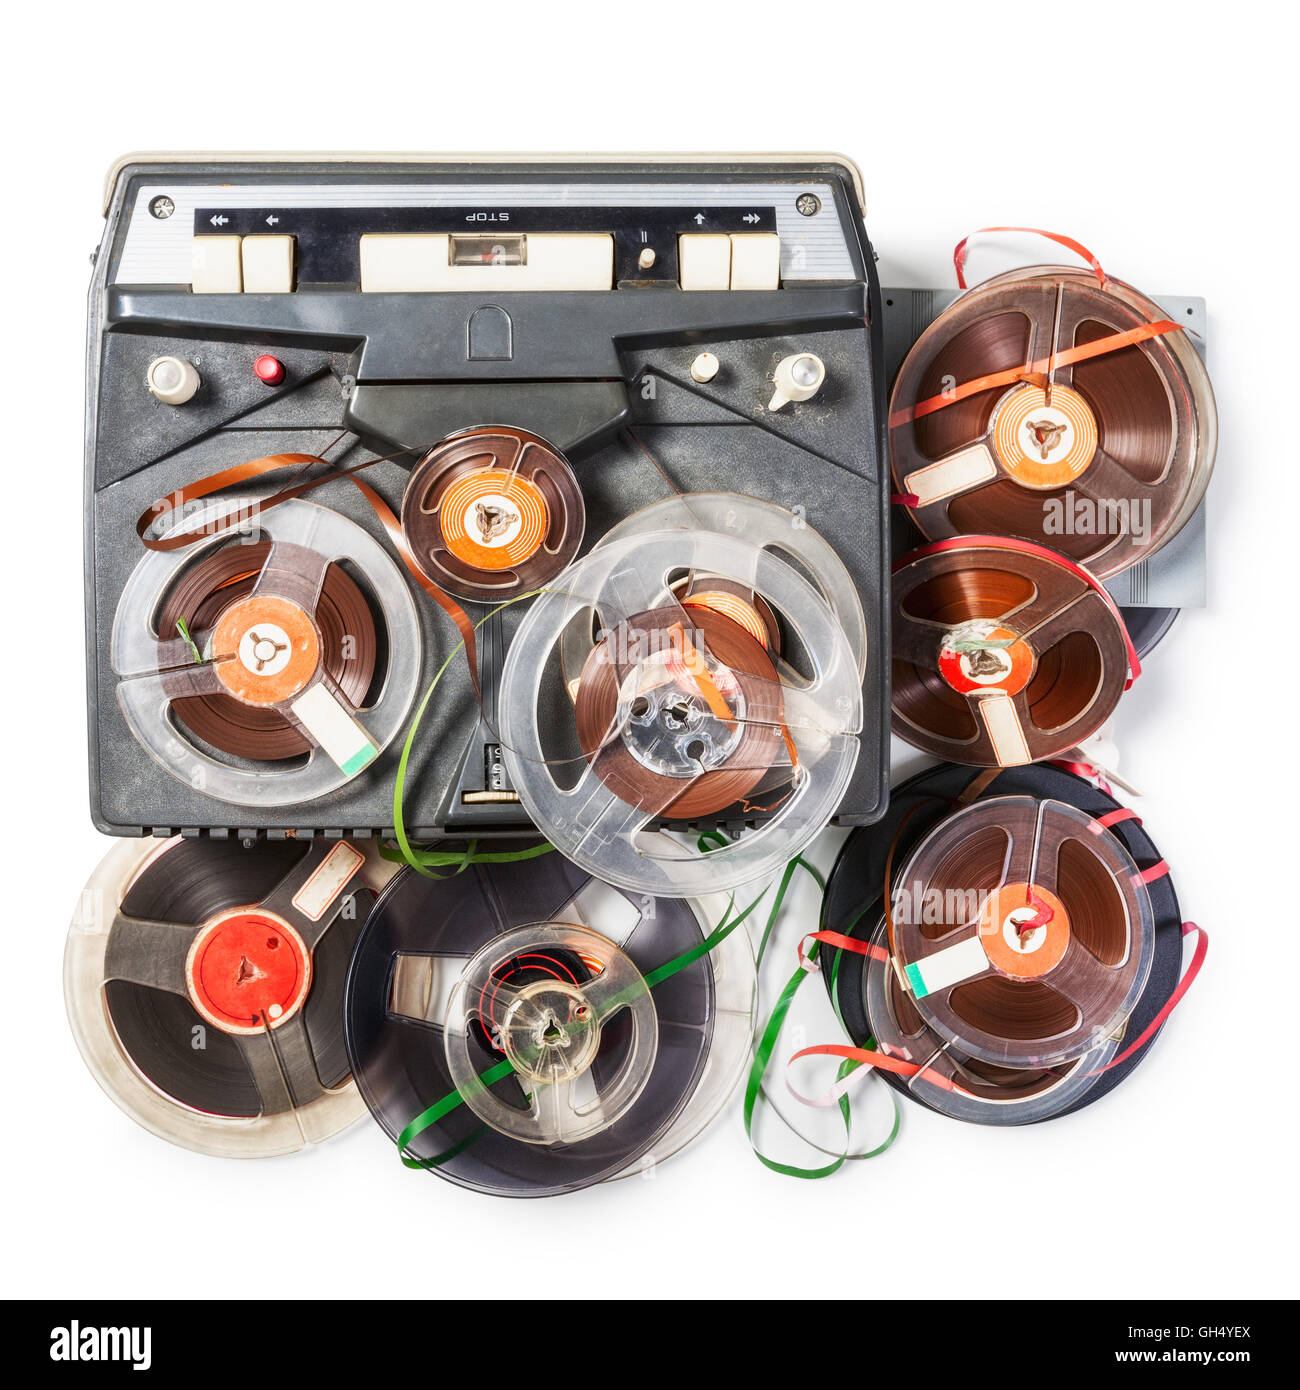 Vintage portable tape recorder and audio reels collection. Objects group isolated on white background with clipping path Stock Photo